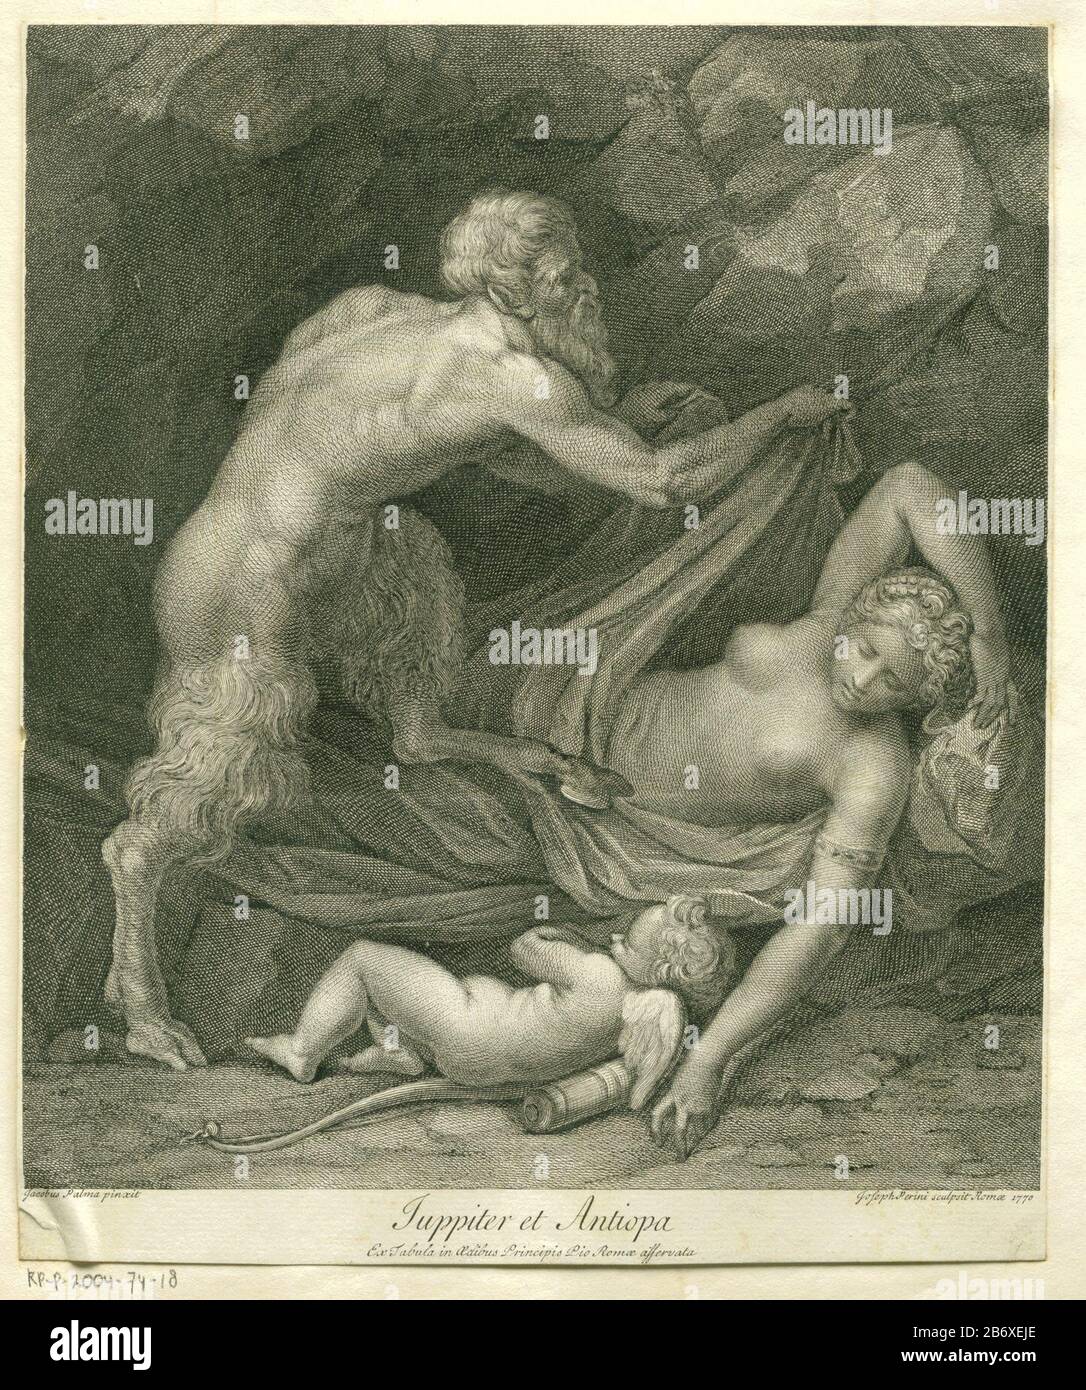 Jupiter en Antiope Afkomstig uit Hamilton, Schola Italica Built in Pastes: A dictionary of painters, from the revival of the art to the present period, by the Rev. Mr. Pilkington AM A new edition, with Considerable alteration, additions, an appendix, and an index, by Henry Fuseli, RA, London 1805, Part III / opposite p.380. Manufacturer :. Printmaker Giuseppe Sforza Perininaar painting: Jacopo Palma (il Vecchio) Dated: 1770 Physical features: etching material: paper Technique: engra (printing process) Dimensions: h 286 mm × W 239 mm Subject: Jupiter, disguised as a satyr, approaches the sleepi Stock Photo